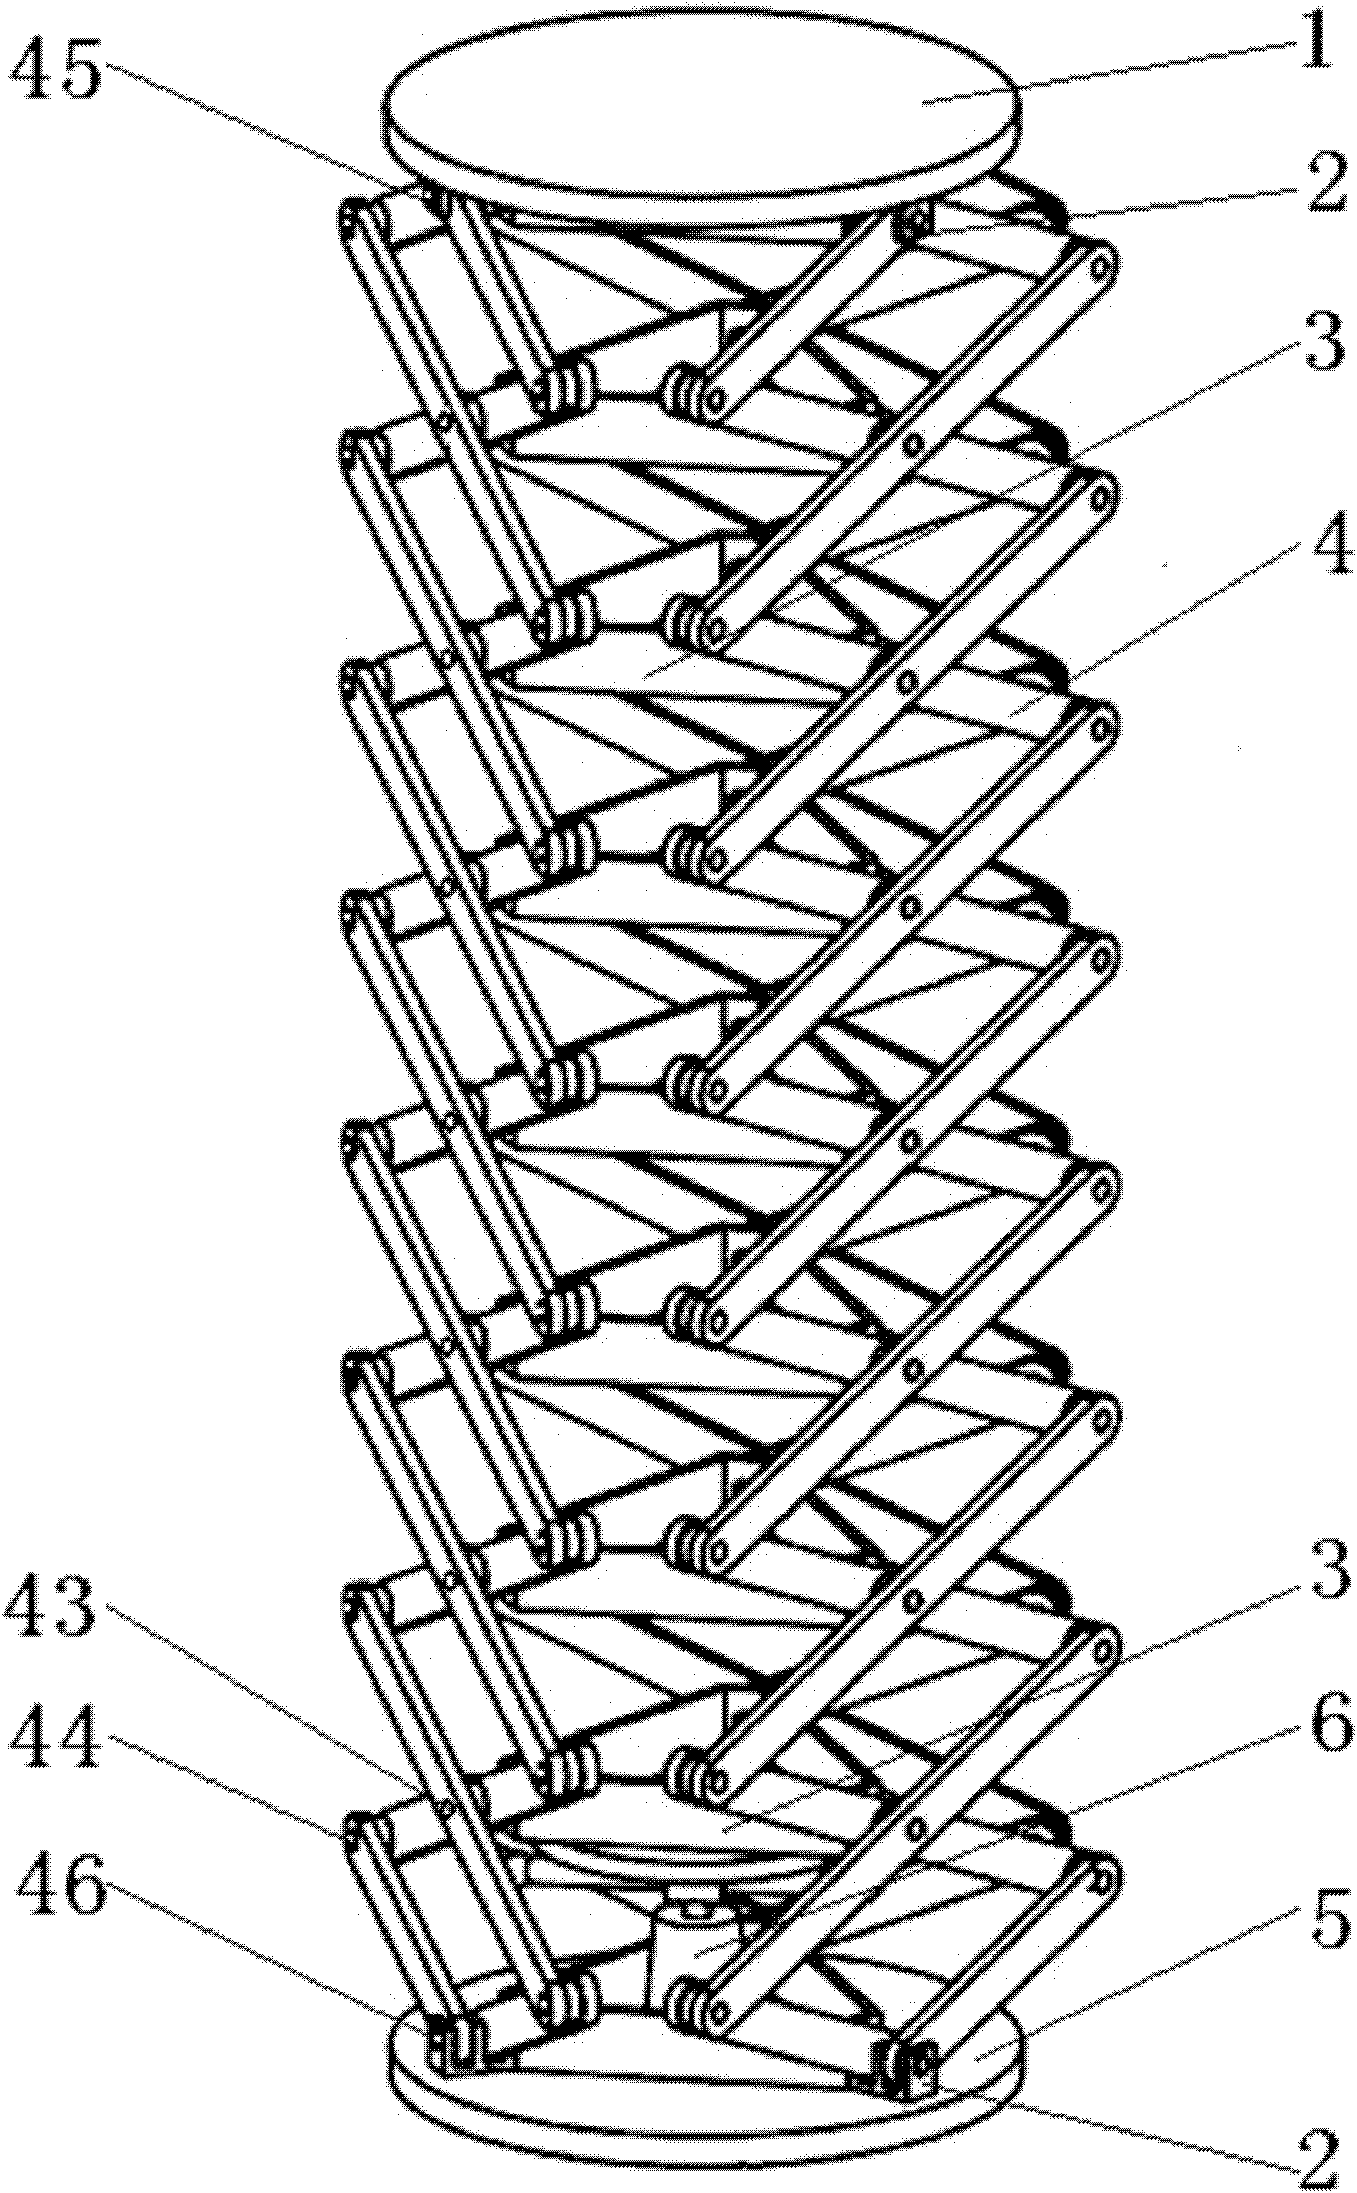 Pivot fixed multi-face constrained scissor-type lifting mechanism